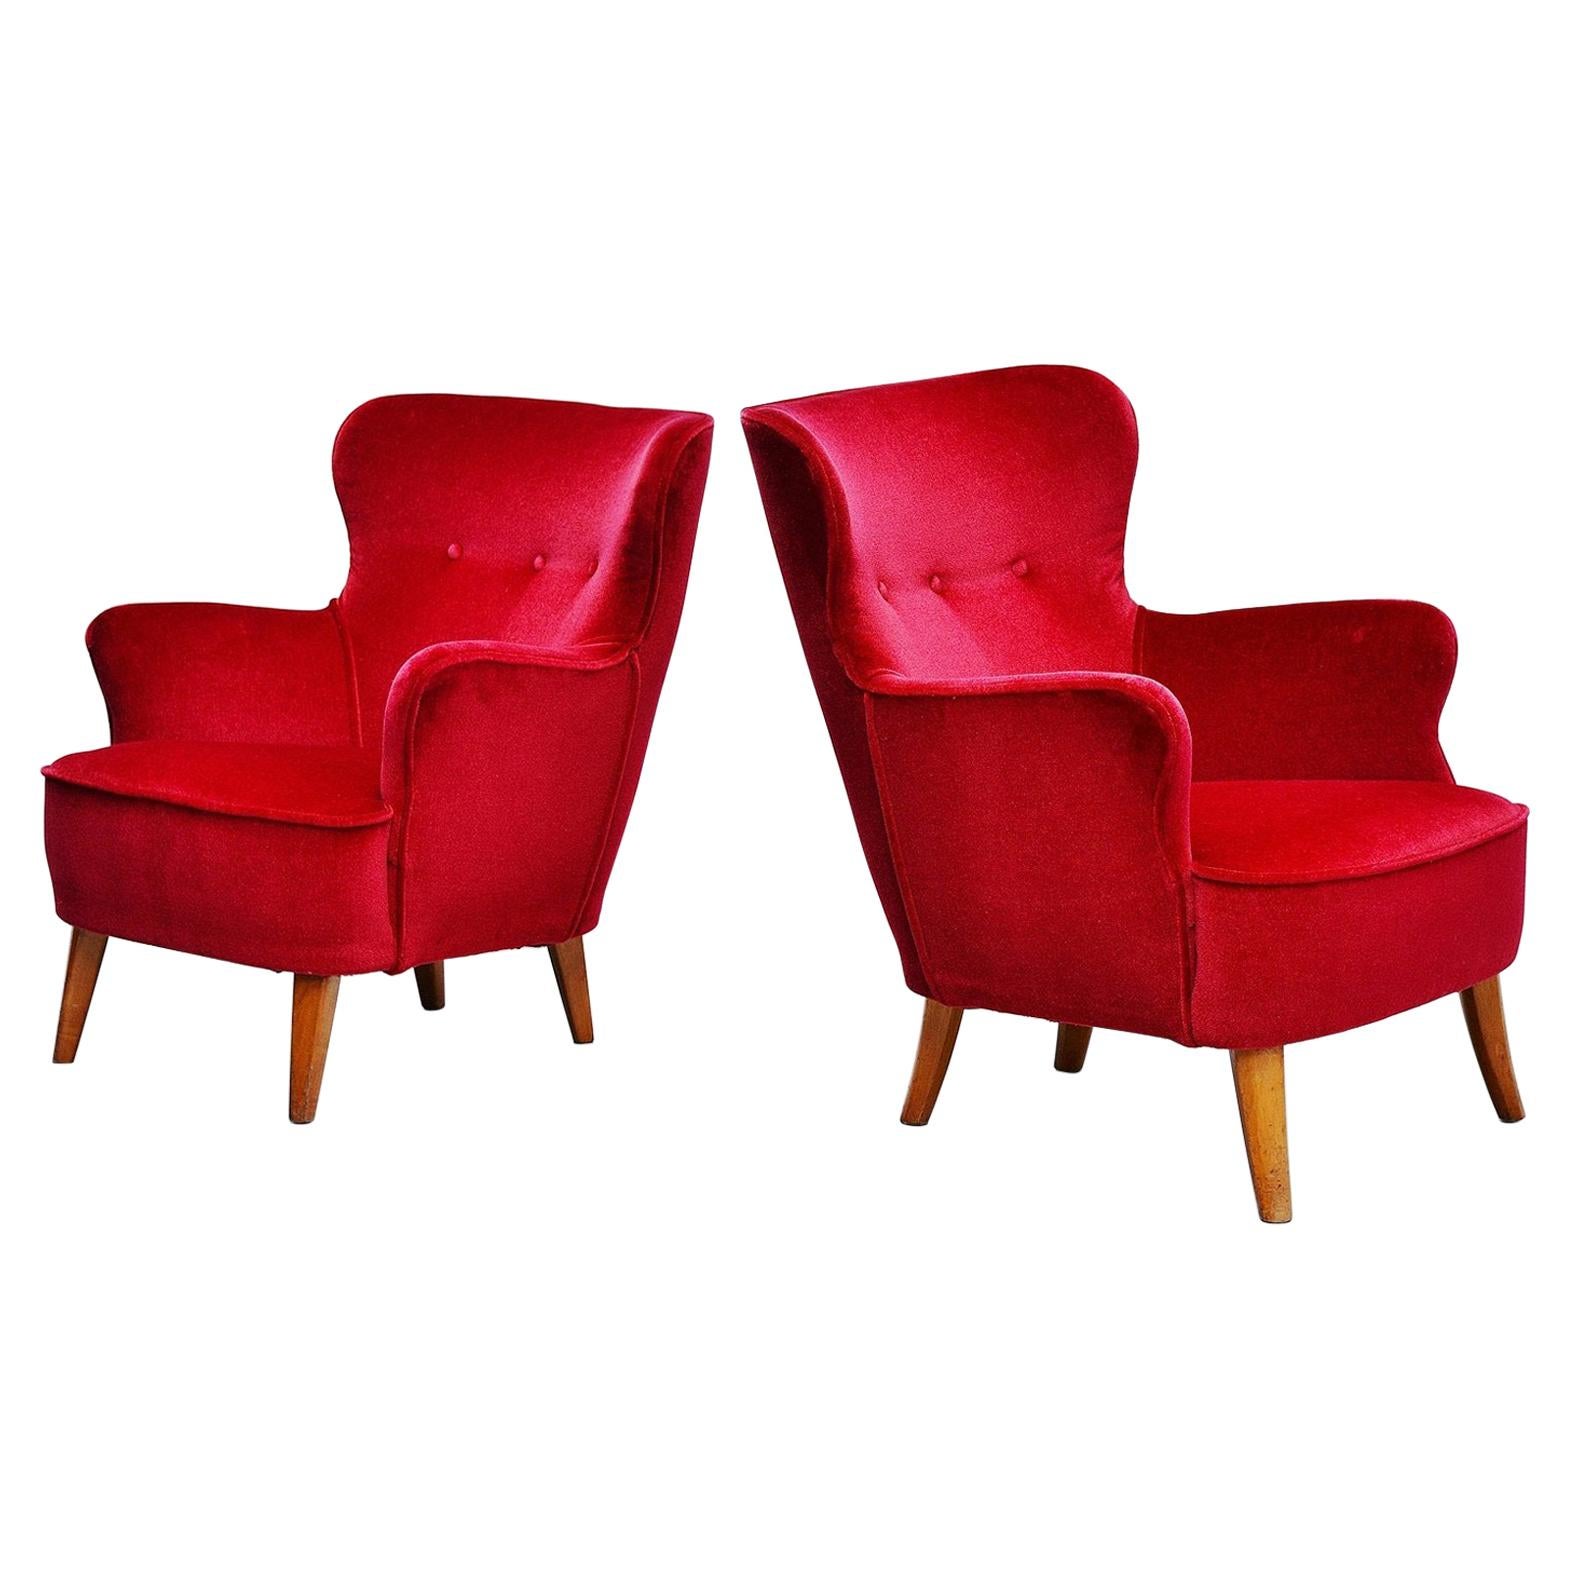 Pair of Theo Ruth Lounge Chairs Artifort, 1955